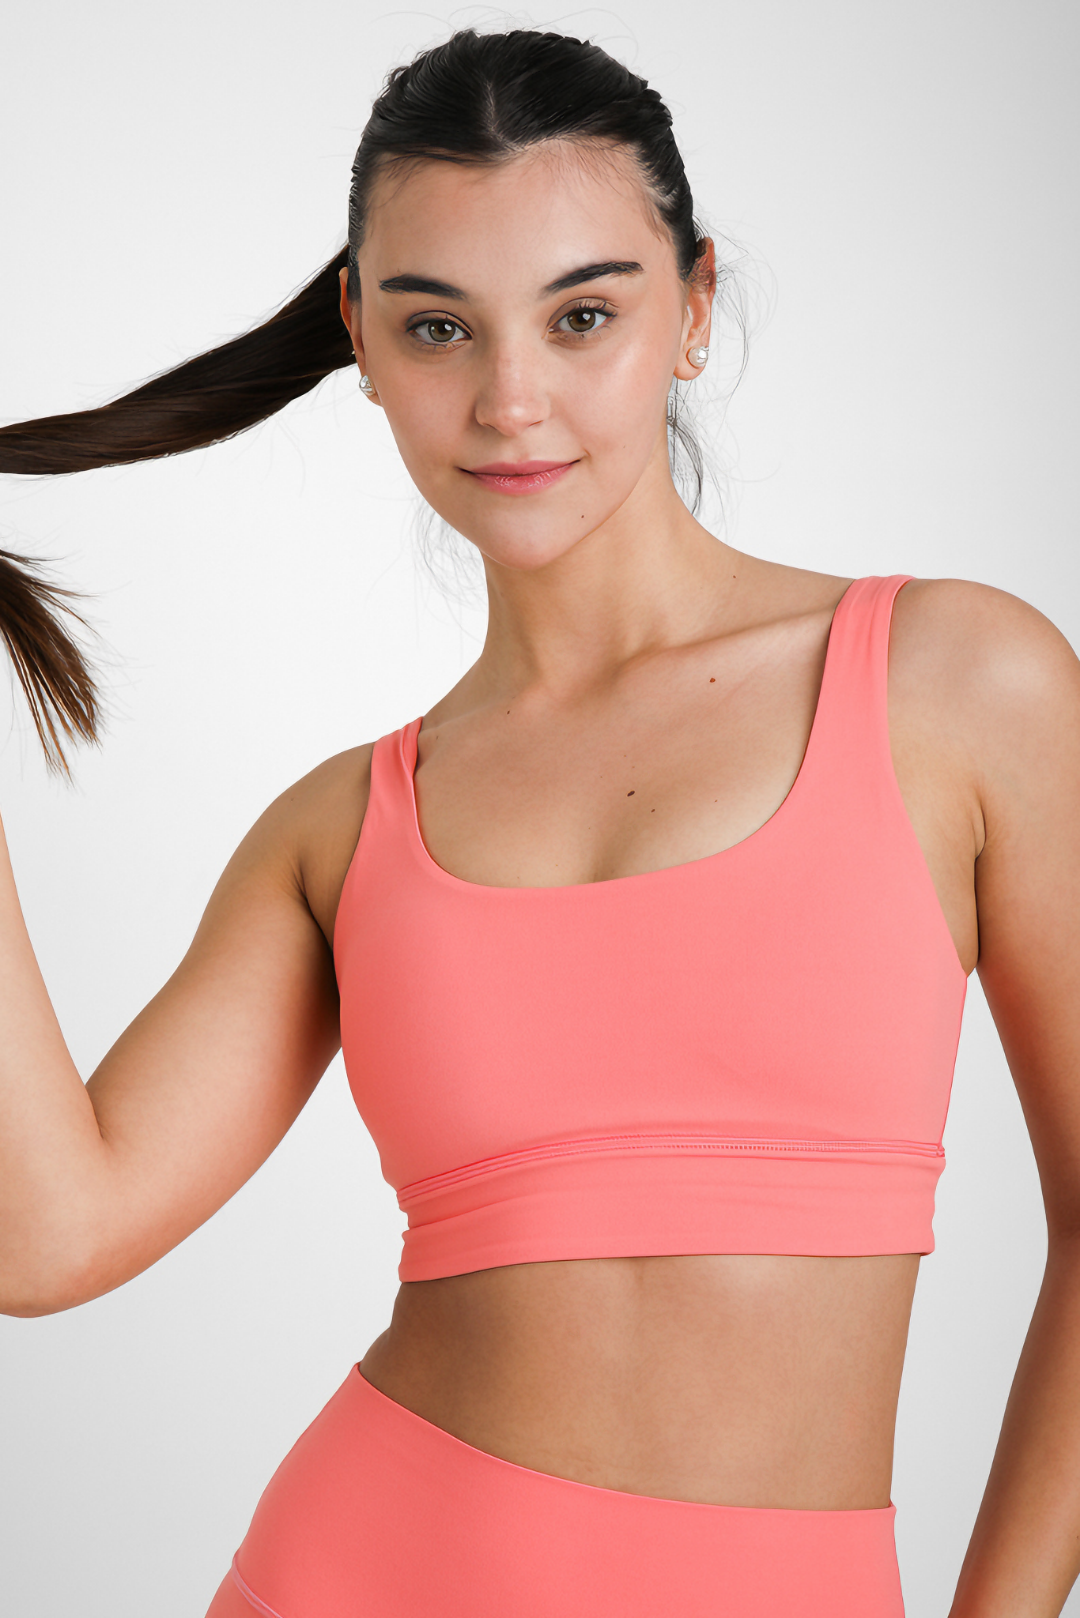 Premium Yoga & Pilates Bras for Comfort and Support | Shop Now!